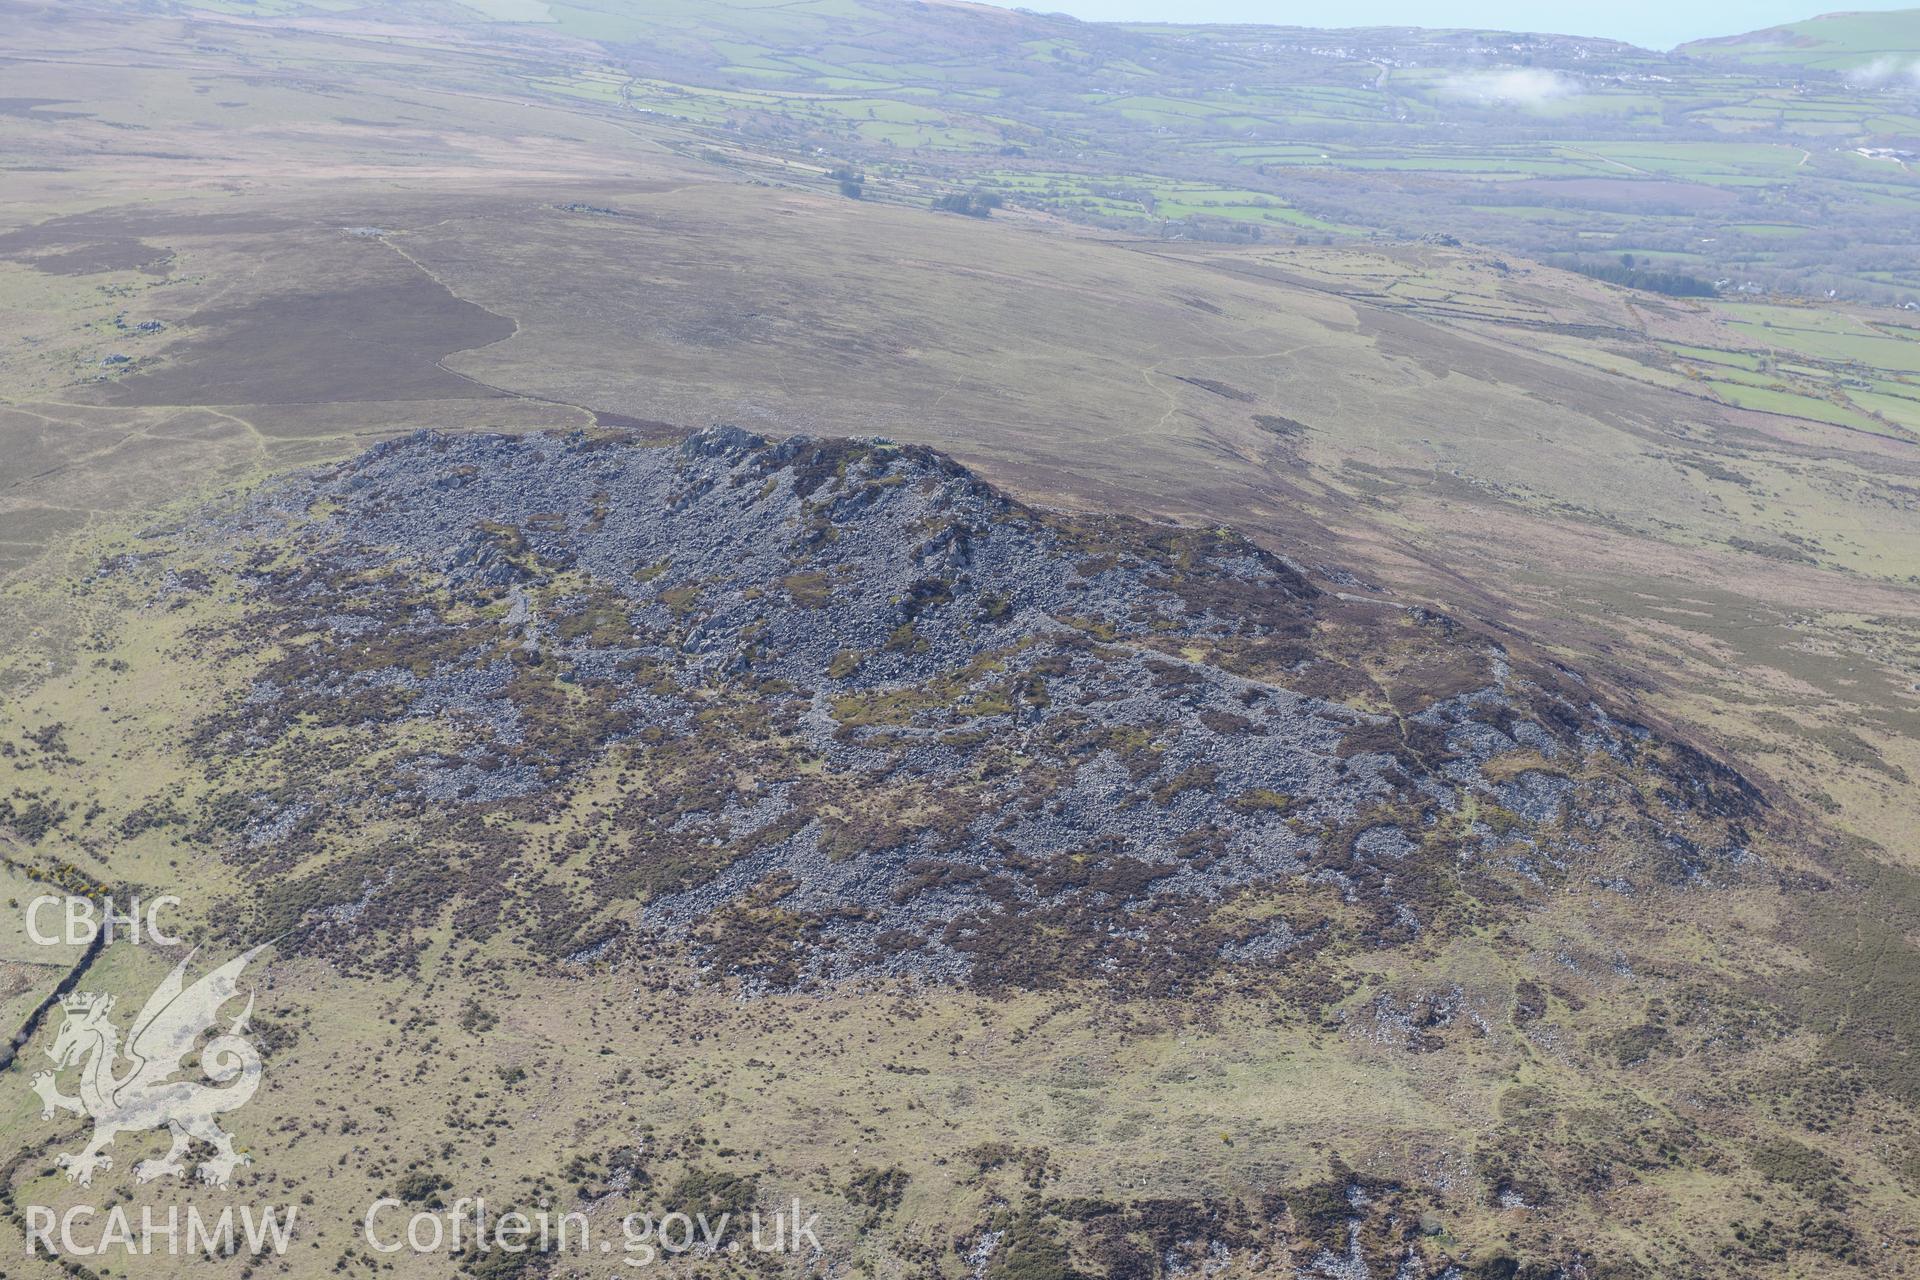 Carn Ingli Camp. Oblique aerial photograph taken during the Royal Commission's programme of archaeological aerial reconnaissance by Toby Driver on 15th April 2015.